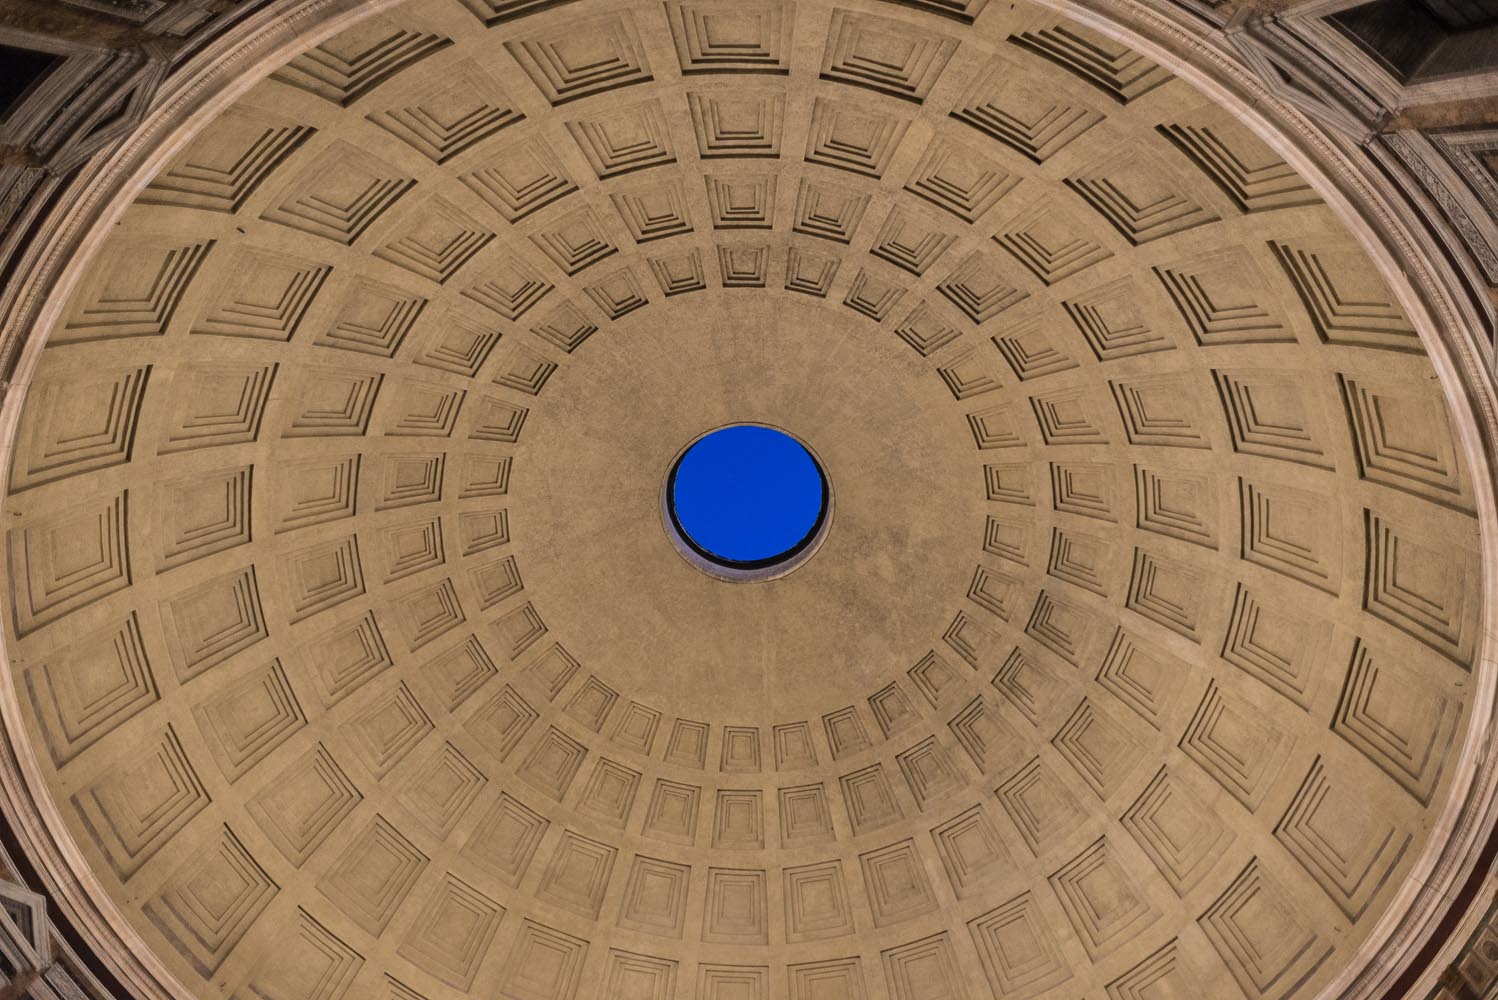 Dome of the Pantheon, Rome